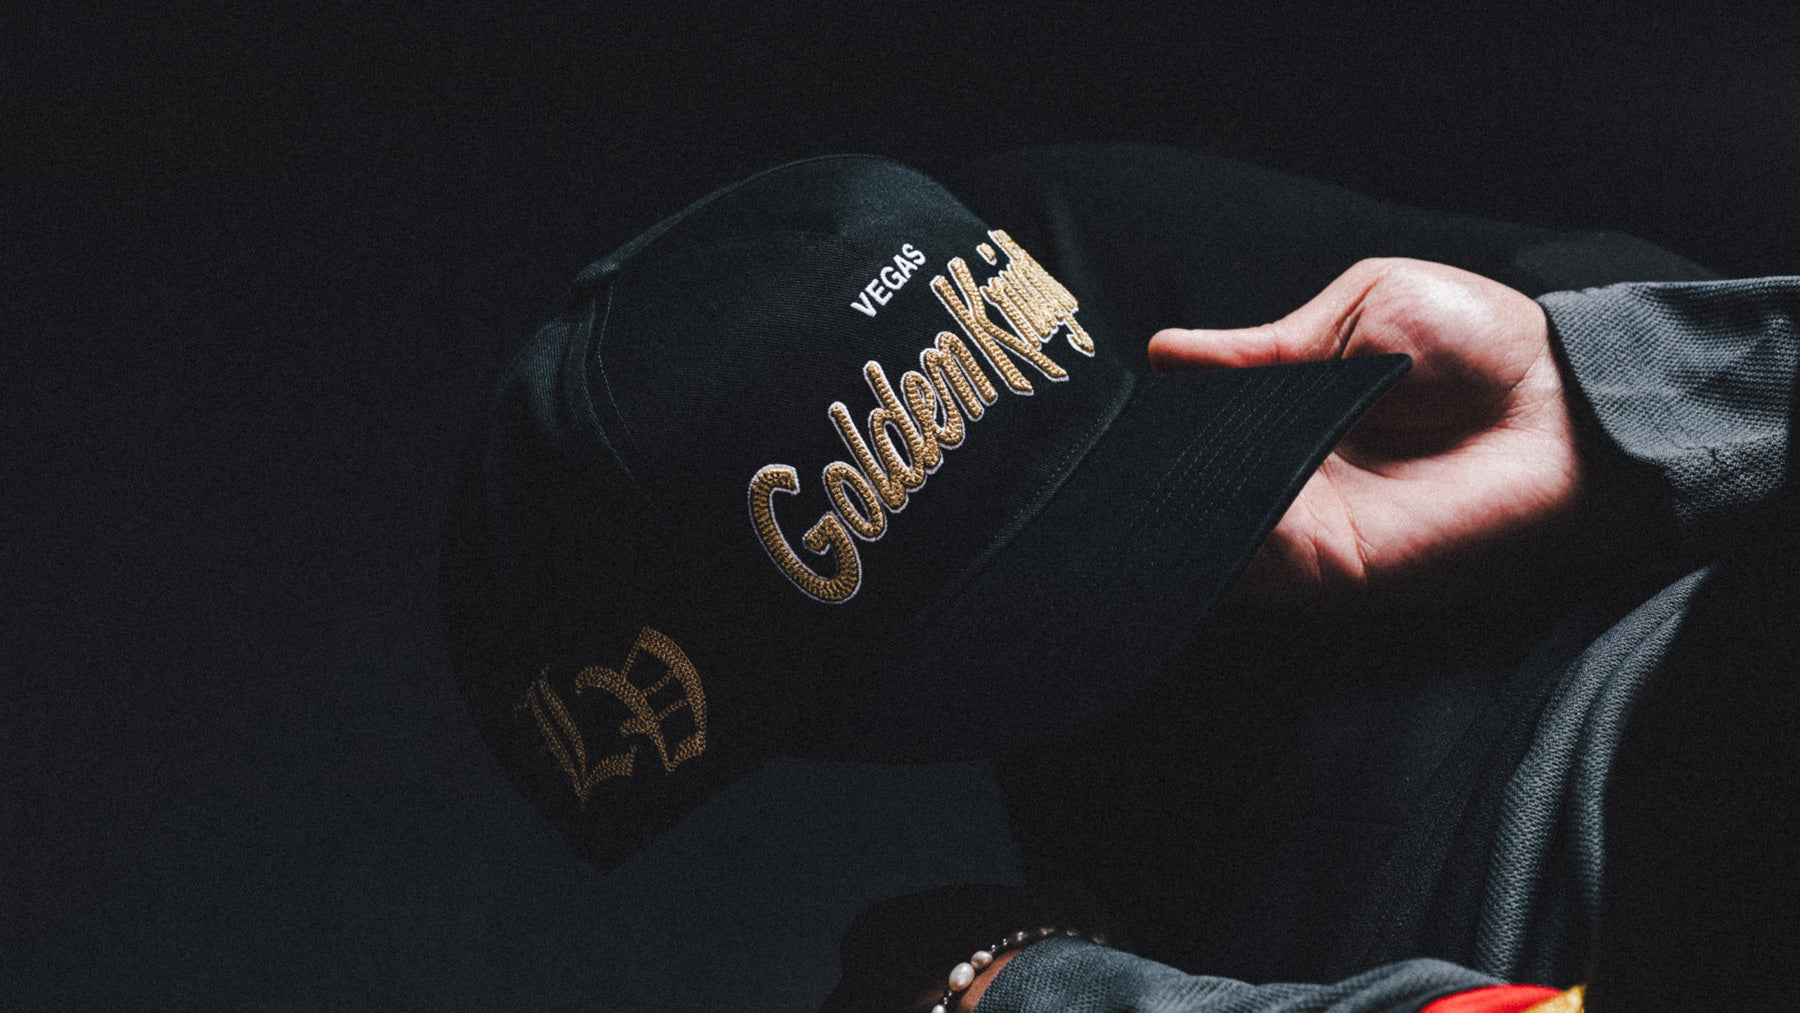 FEATURE x 47 Brand Celebrate The Las Vegas Golden Knights